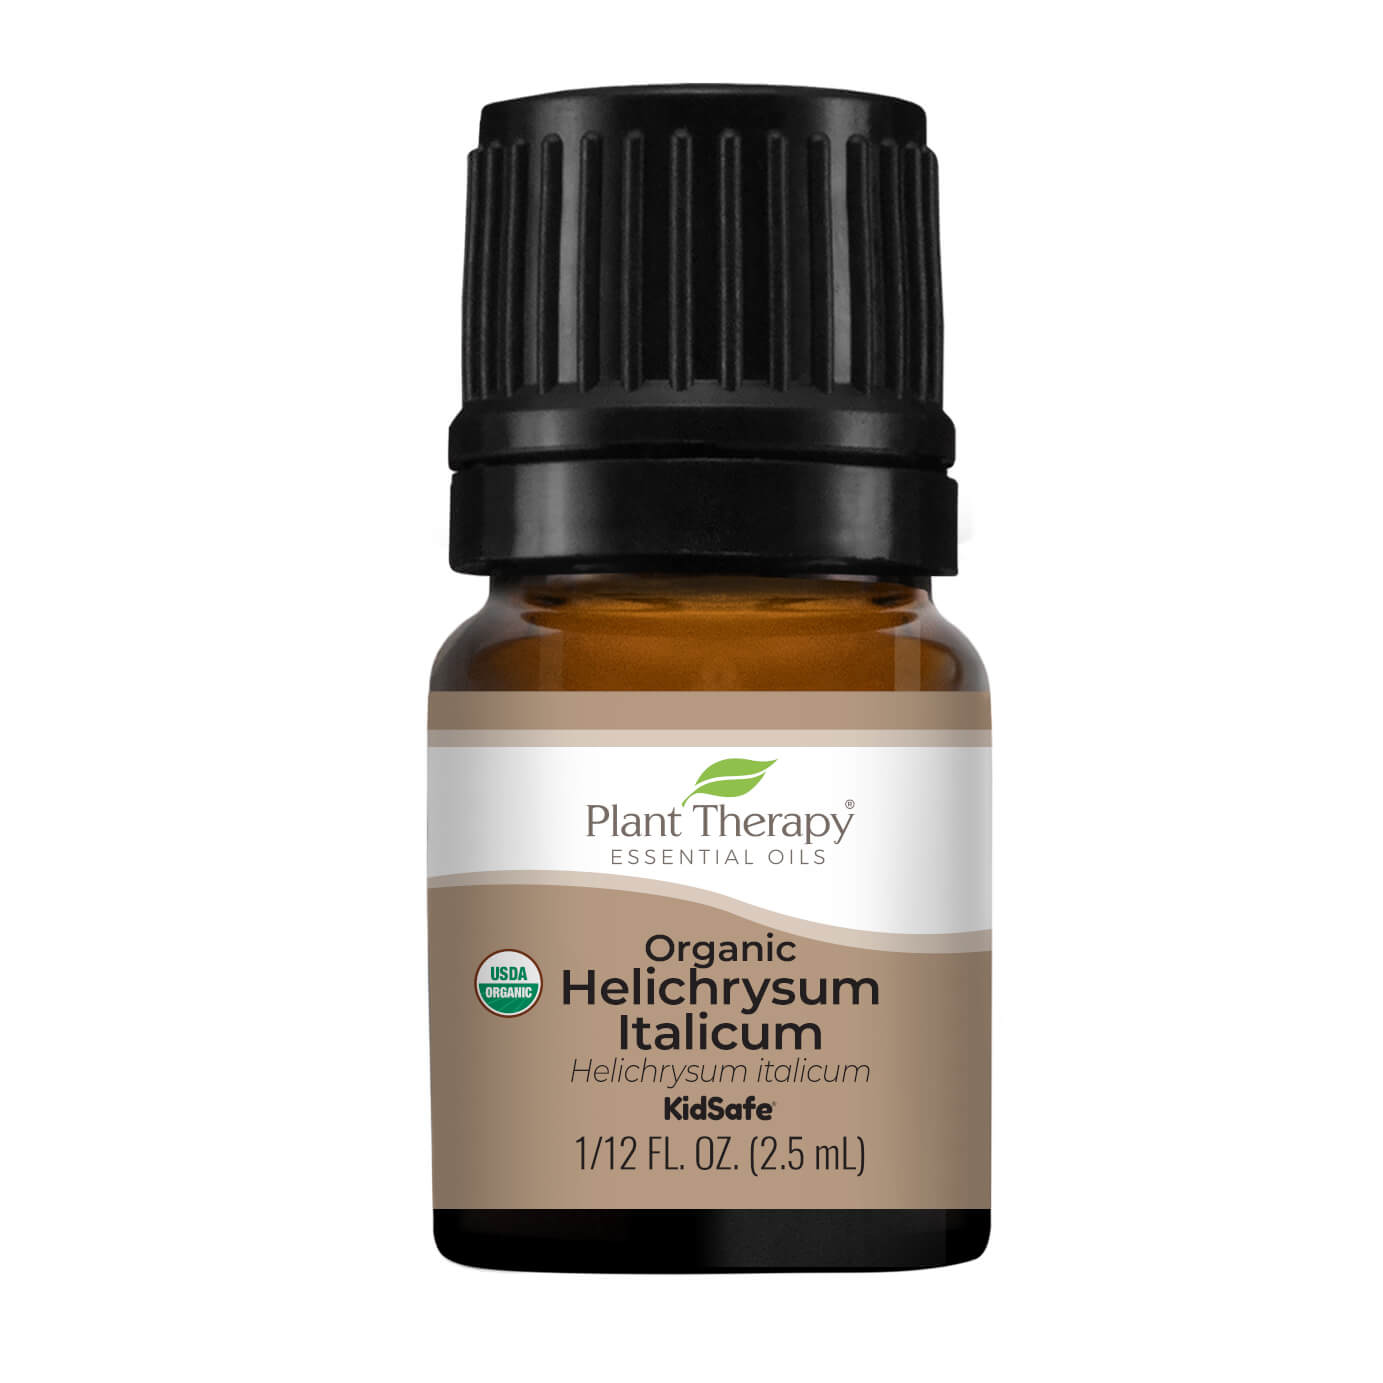 Plant Therapy Organic Helichrysum Italicum Essential Oil 100% Pure, USDA Certified Organic, Undiluted, Natural Aromatherapy, Therapeutic Grade 2.5 mL (1/12 oz) - image 1 of 7